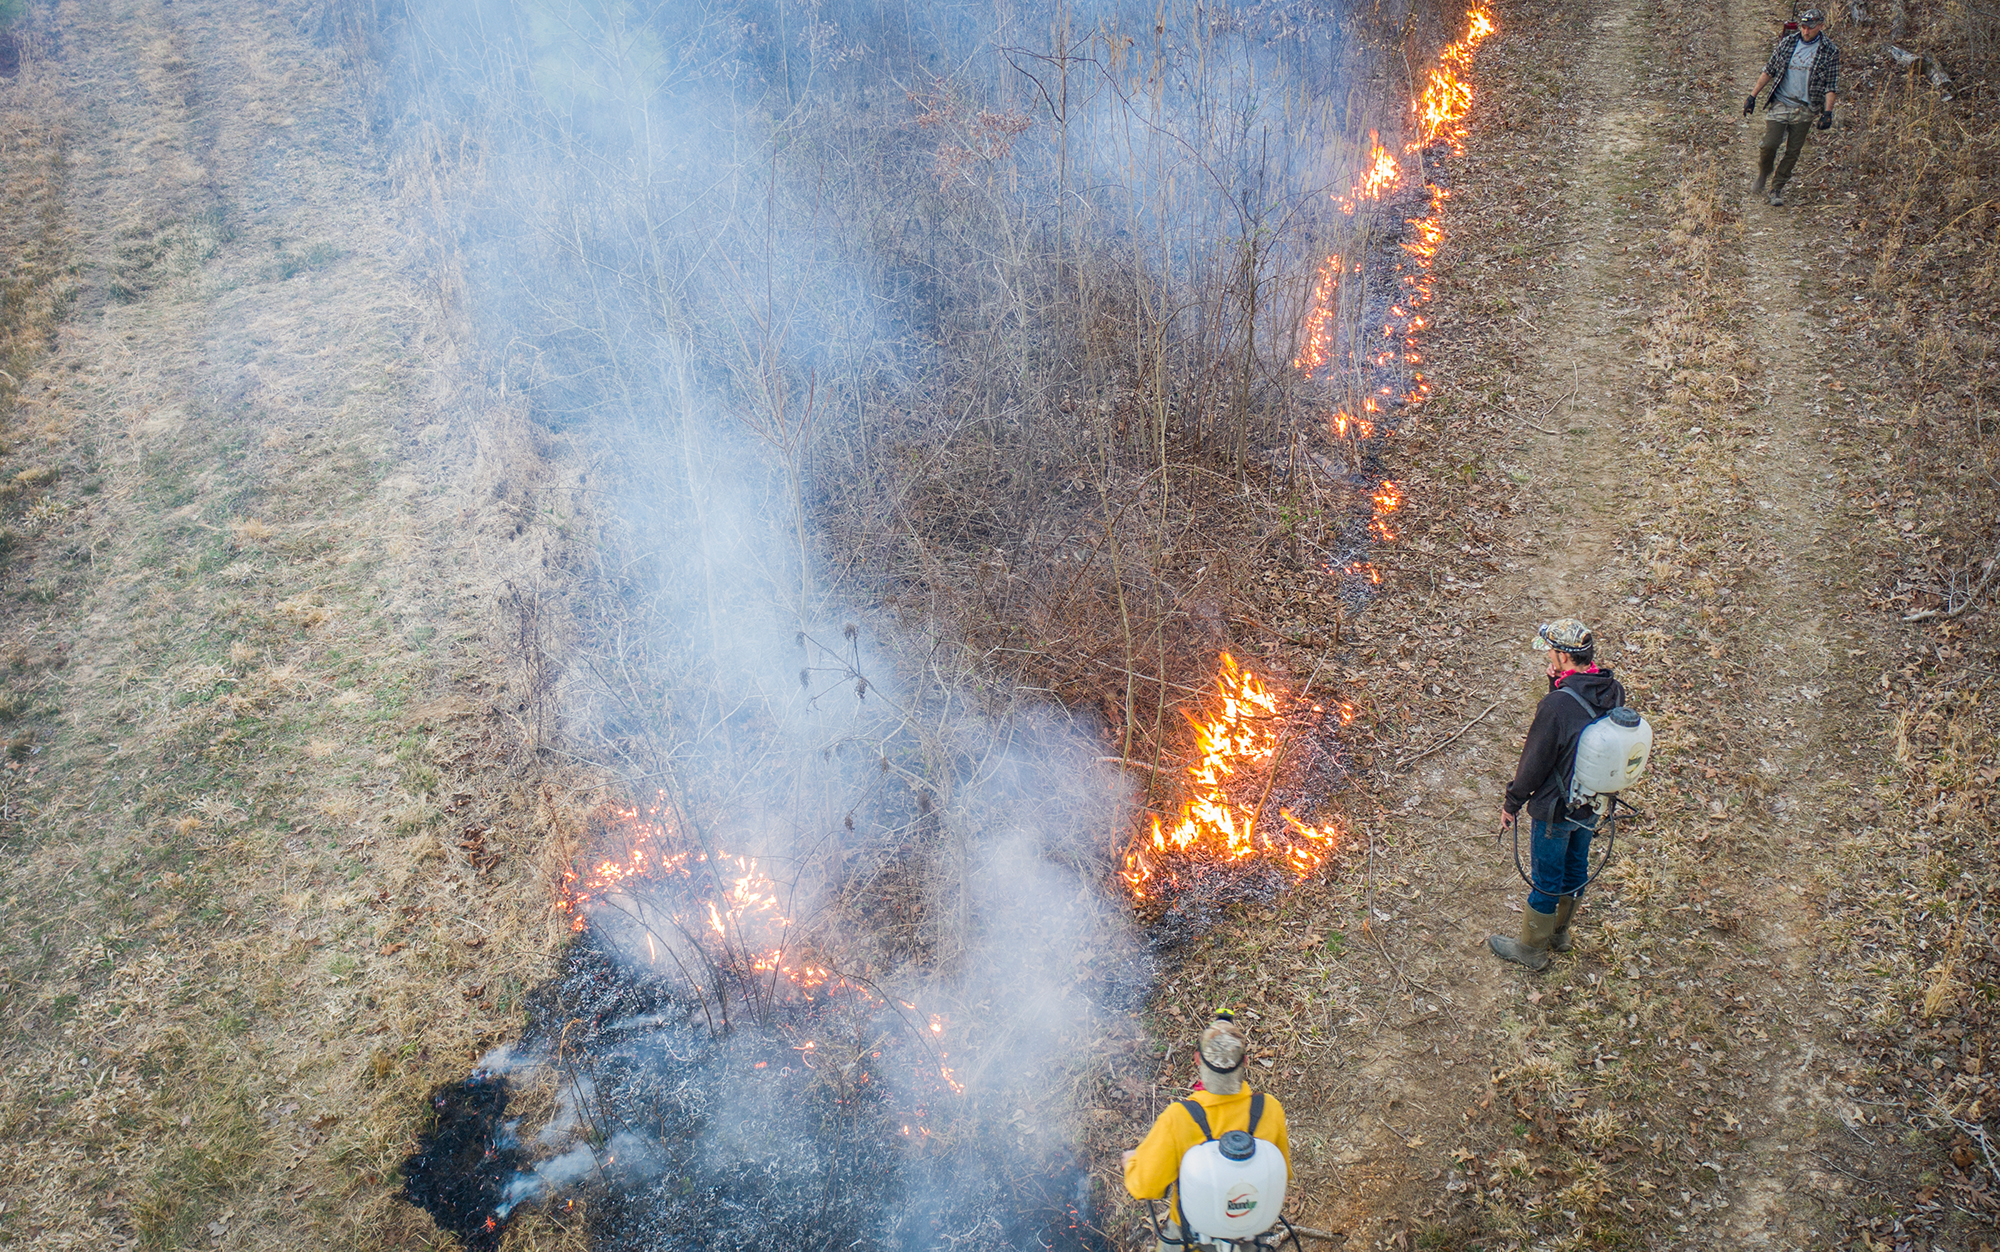 Using backpack sprayers to spray water during a controlled burn.